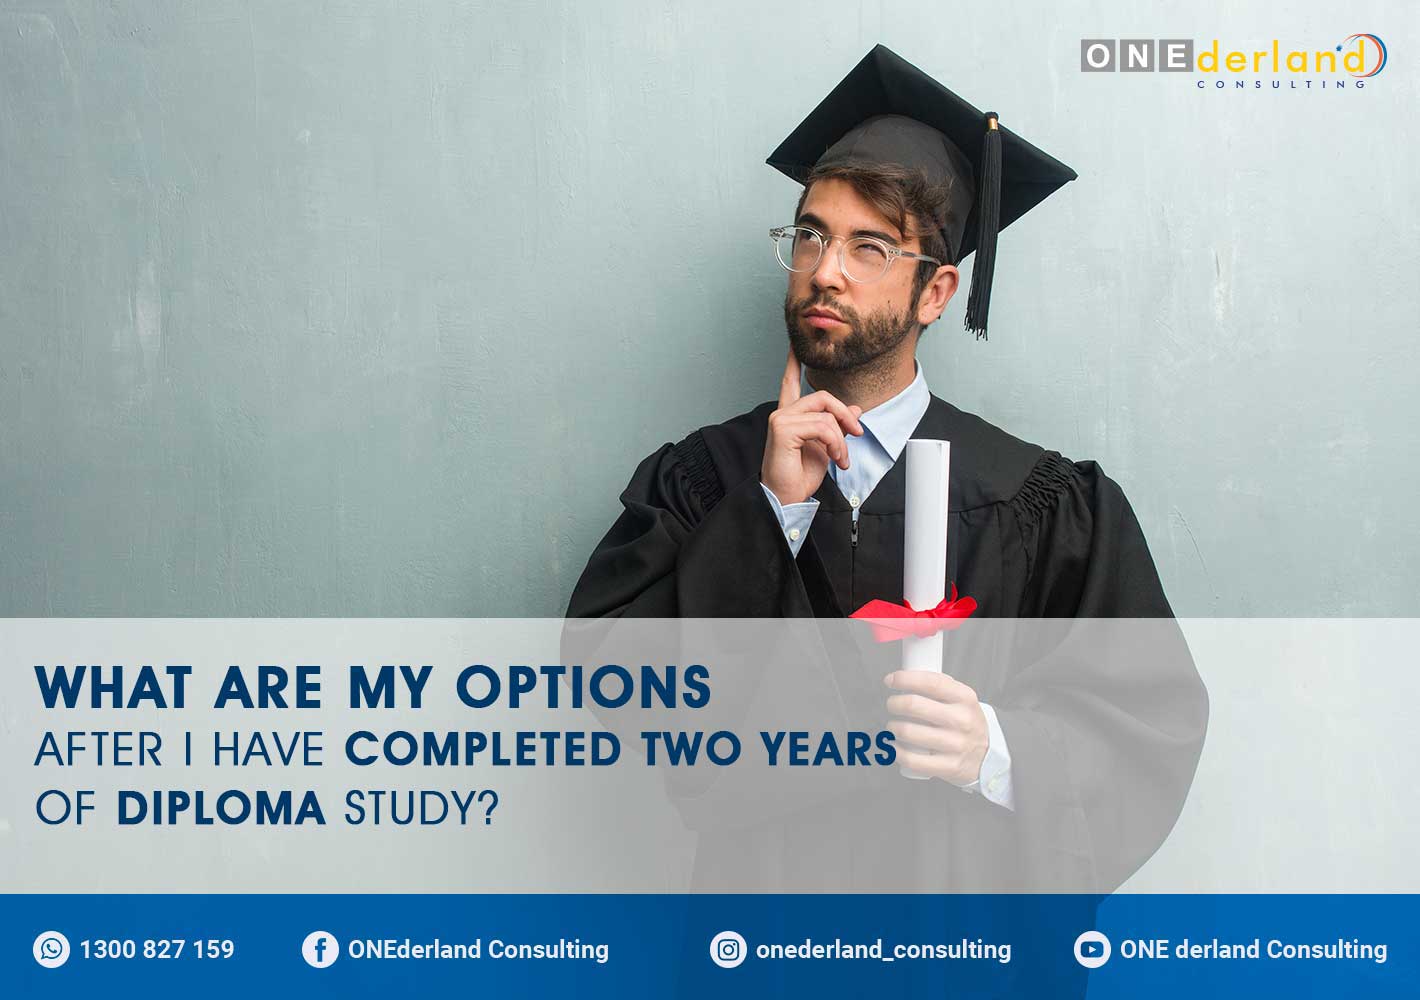 Visa Options After Completing Two Years of Diploma Study